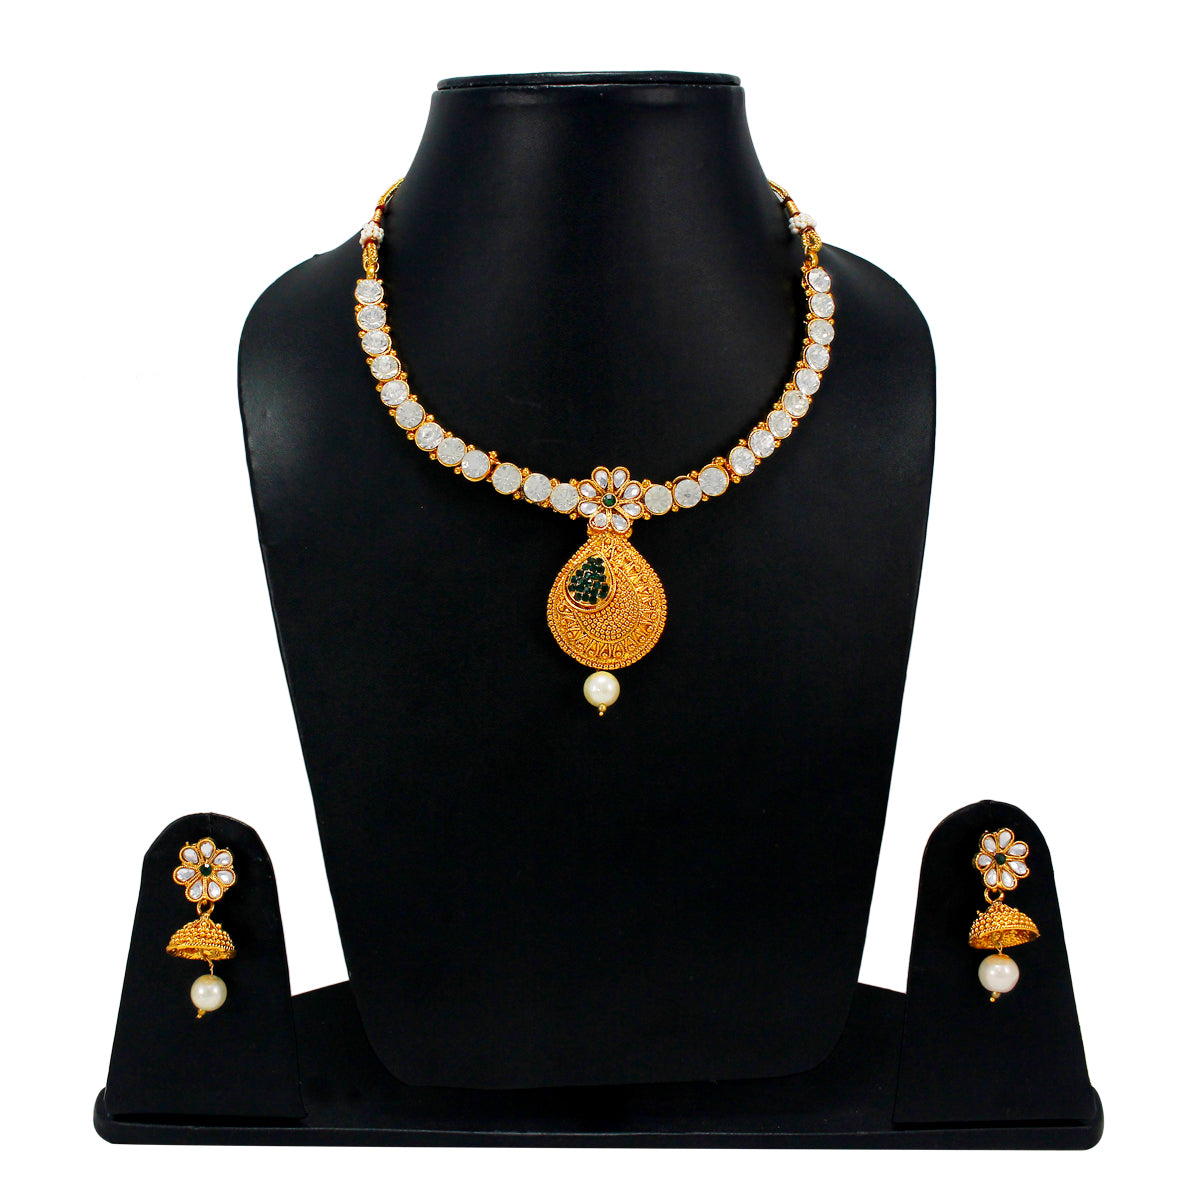 Royal Rani Har Design Necklace and Earrings with White Green Stones and Pearls